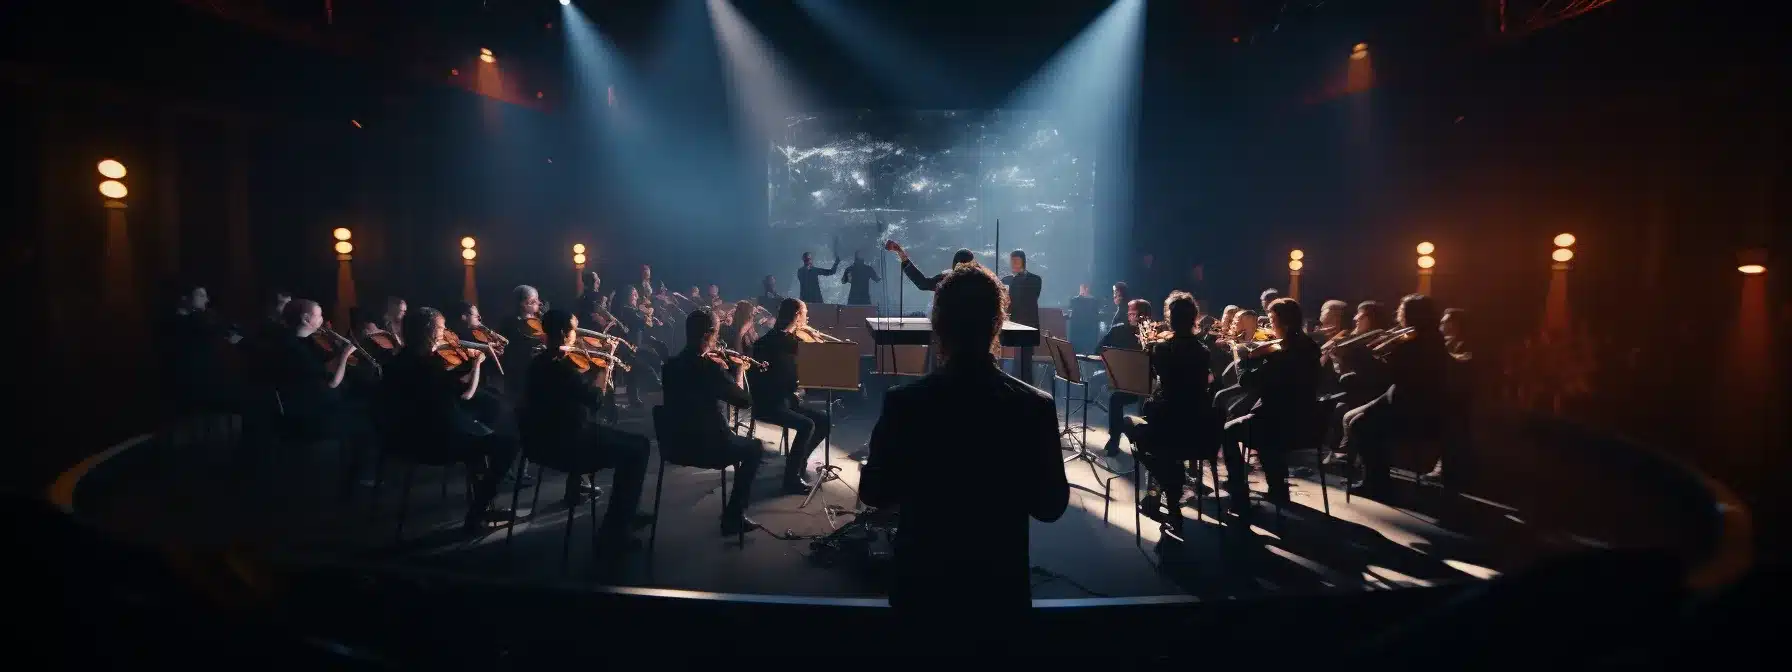 The Image Scene Is A Symphony Conductor Leading A Performance.